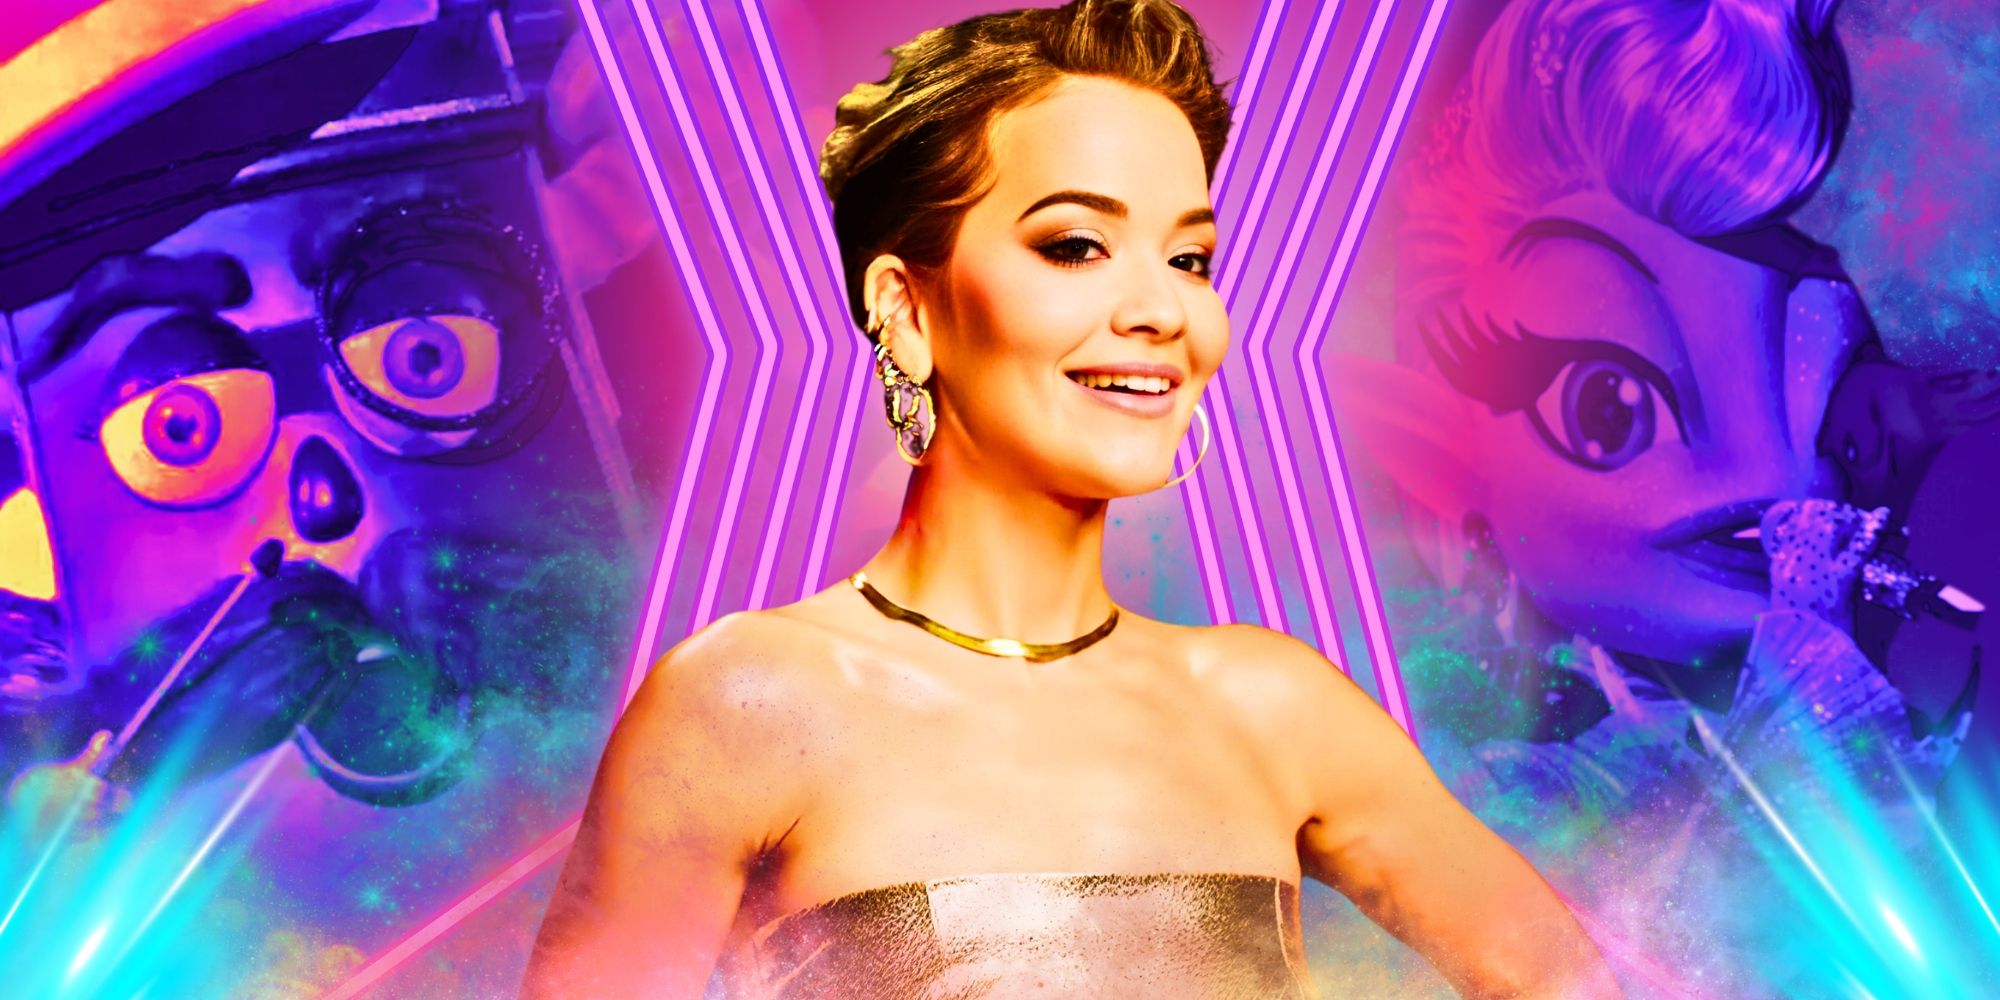 the masked singer season 11 rita ora montage with costumed contsstants in background